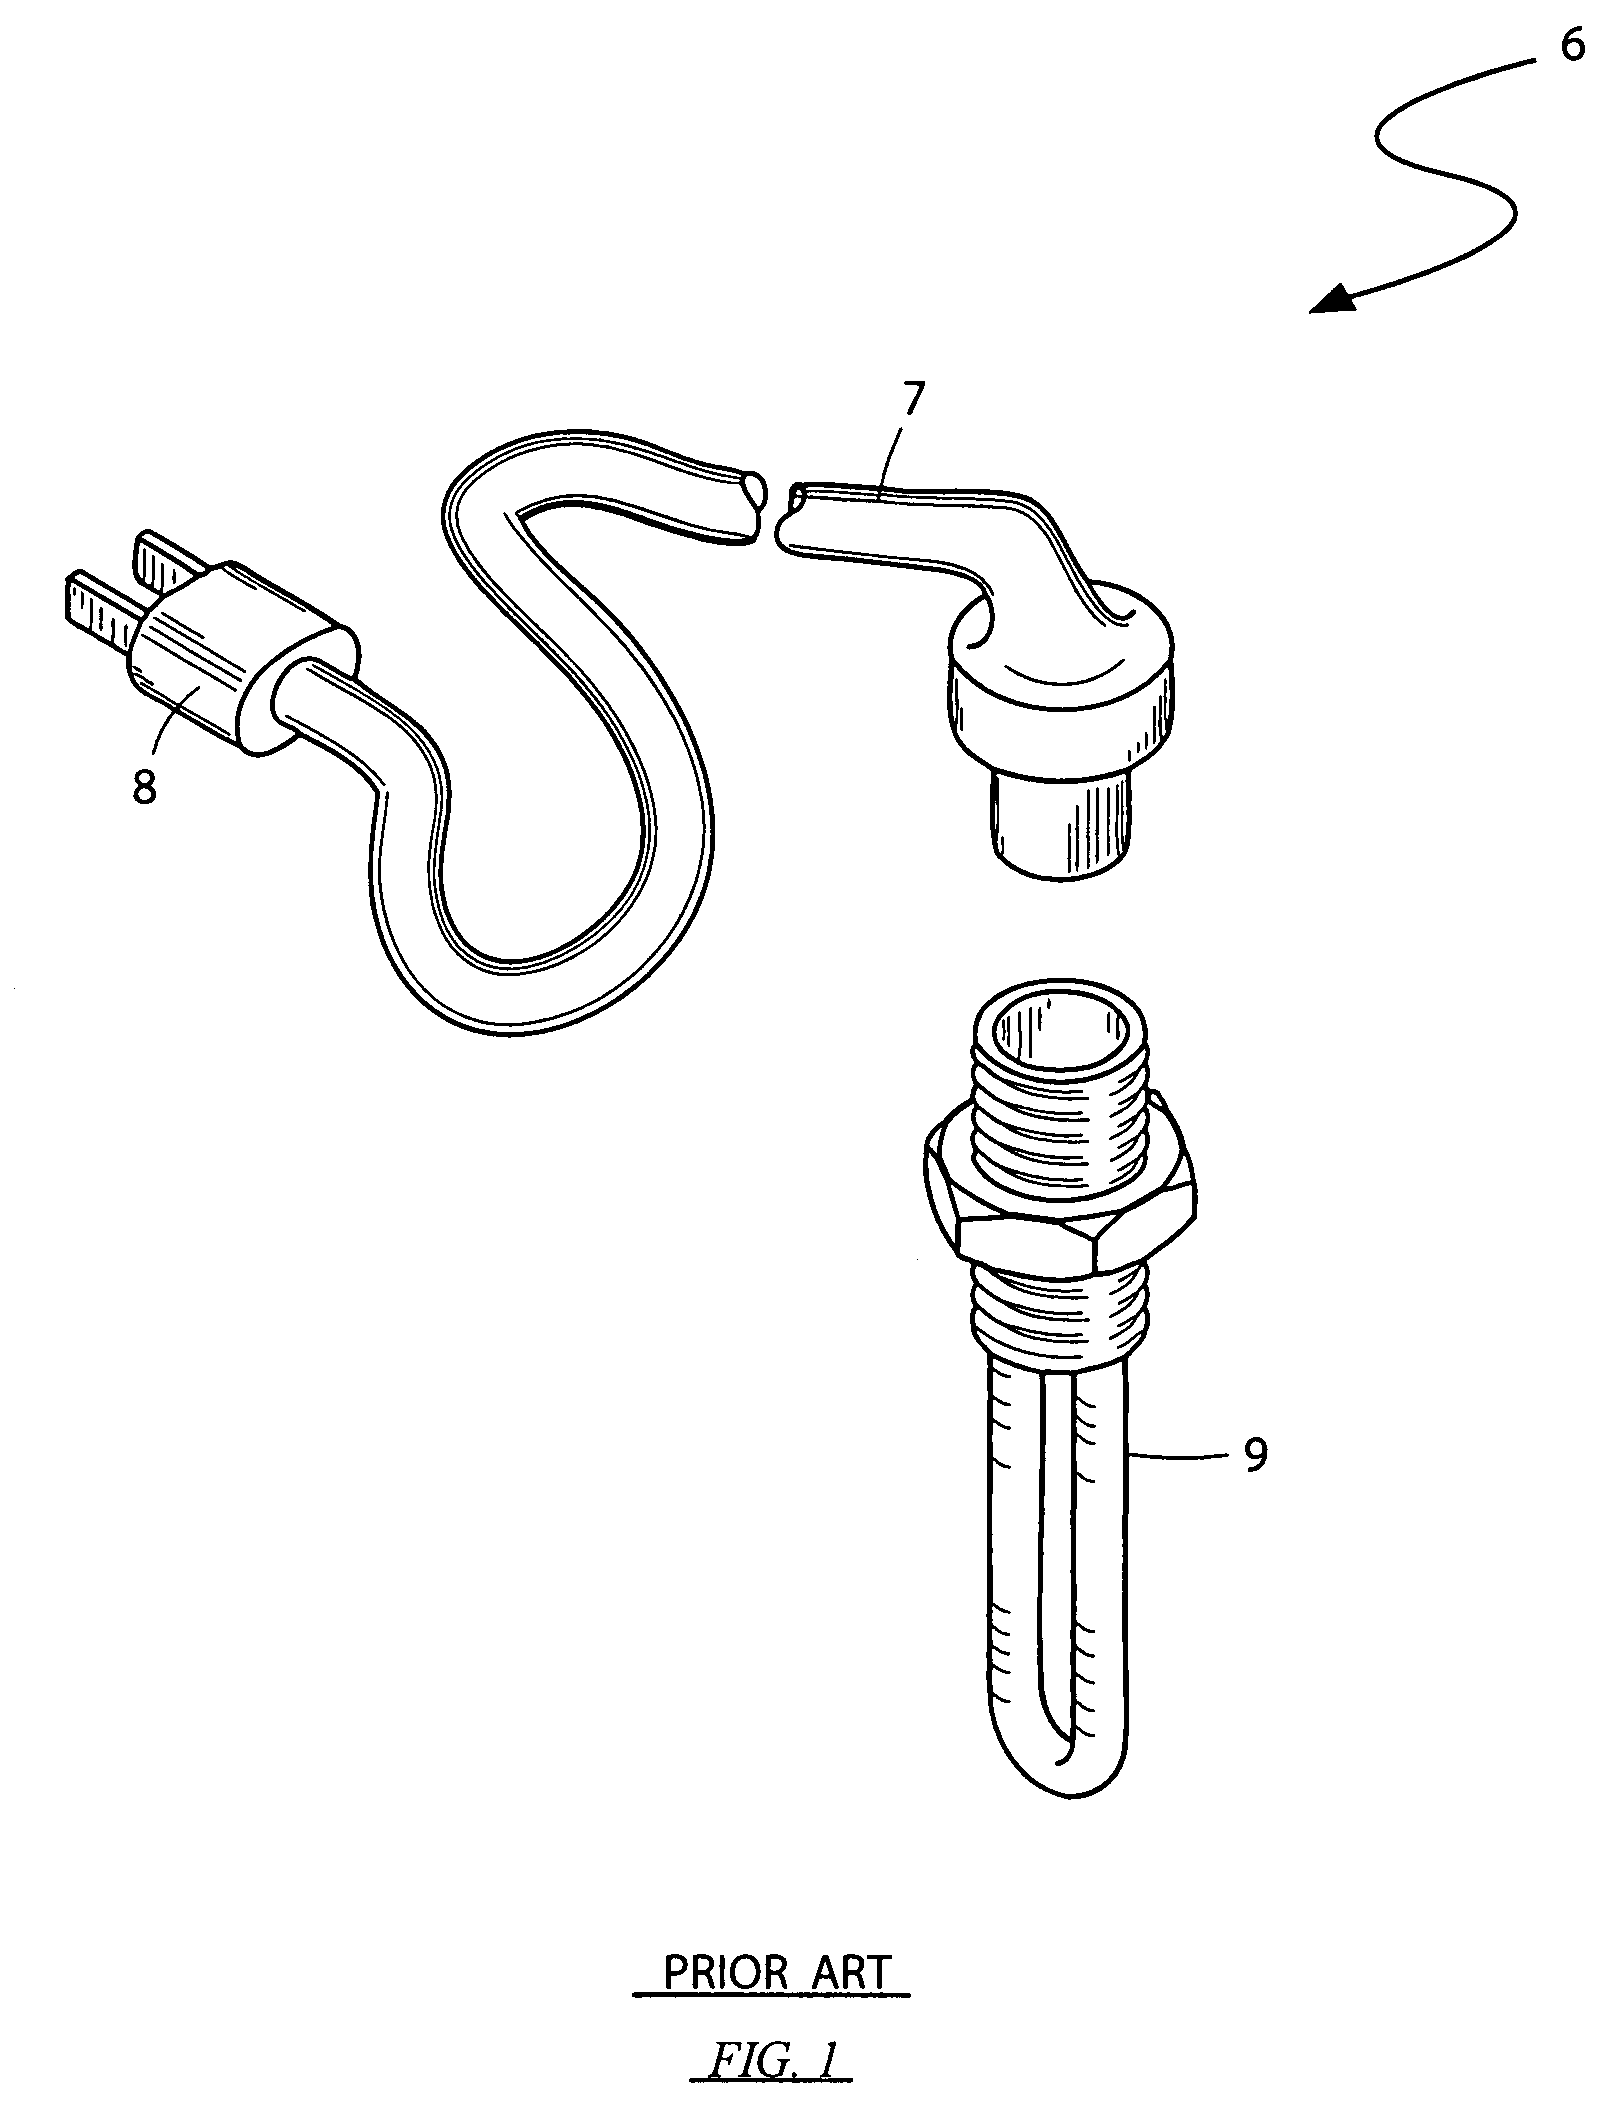 Heating element for fuel tank